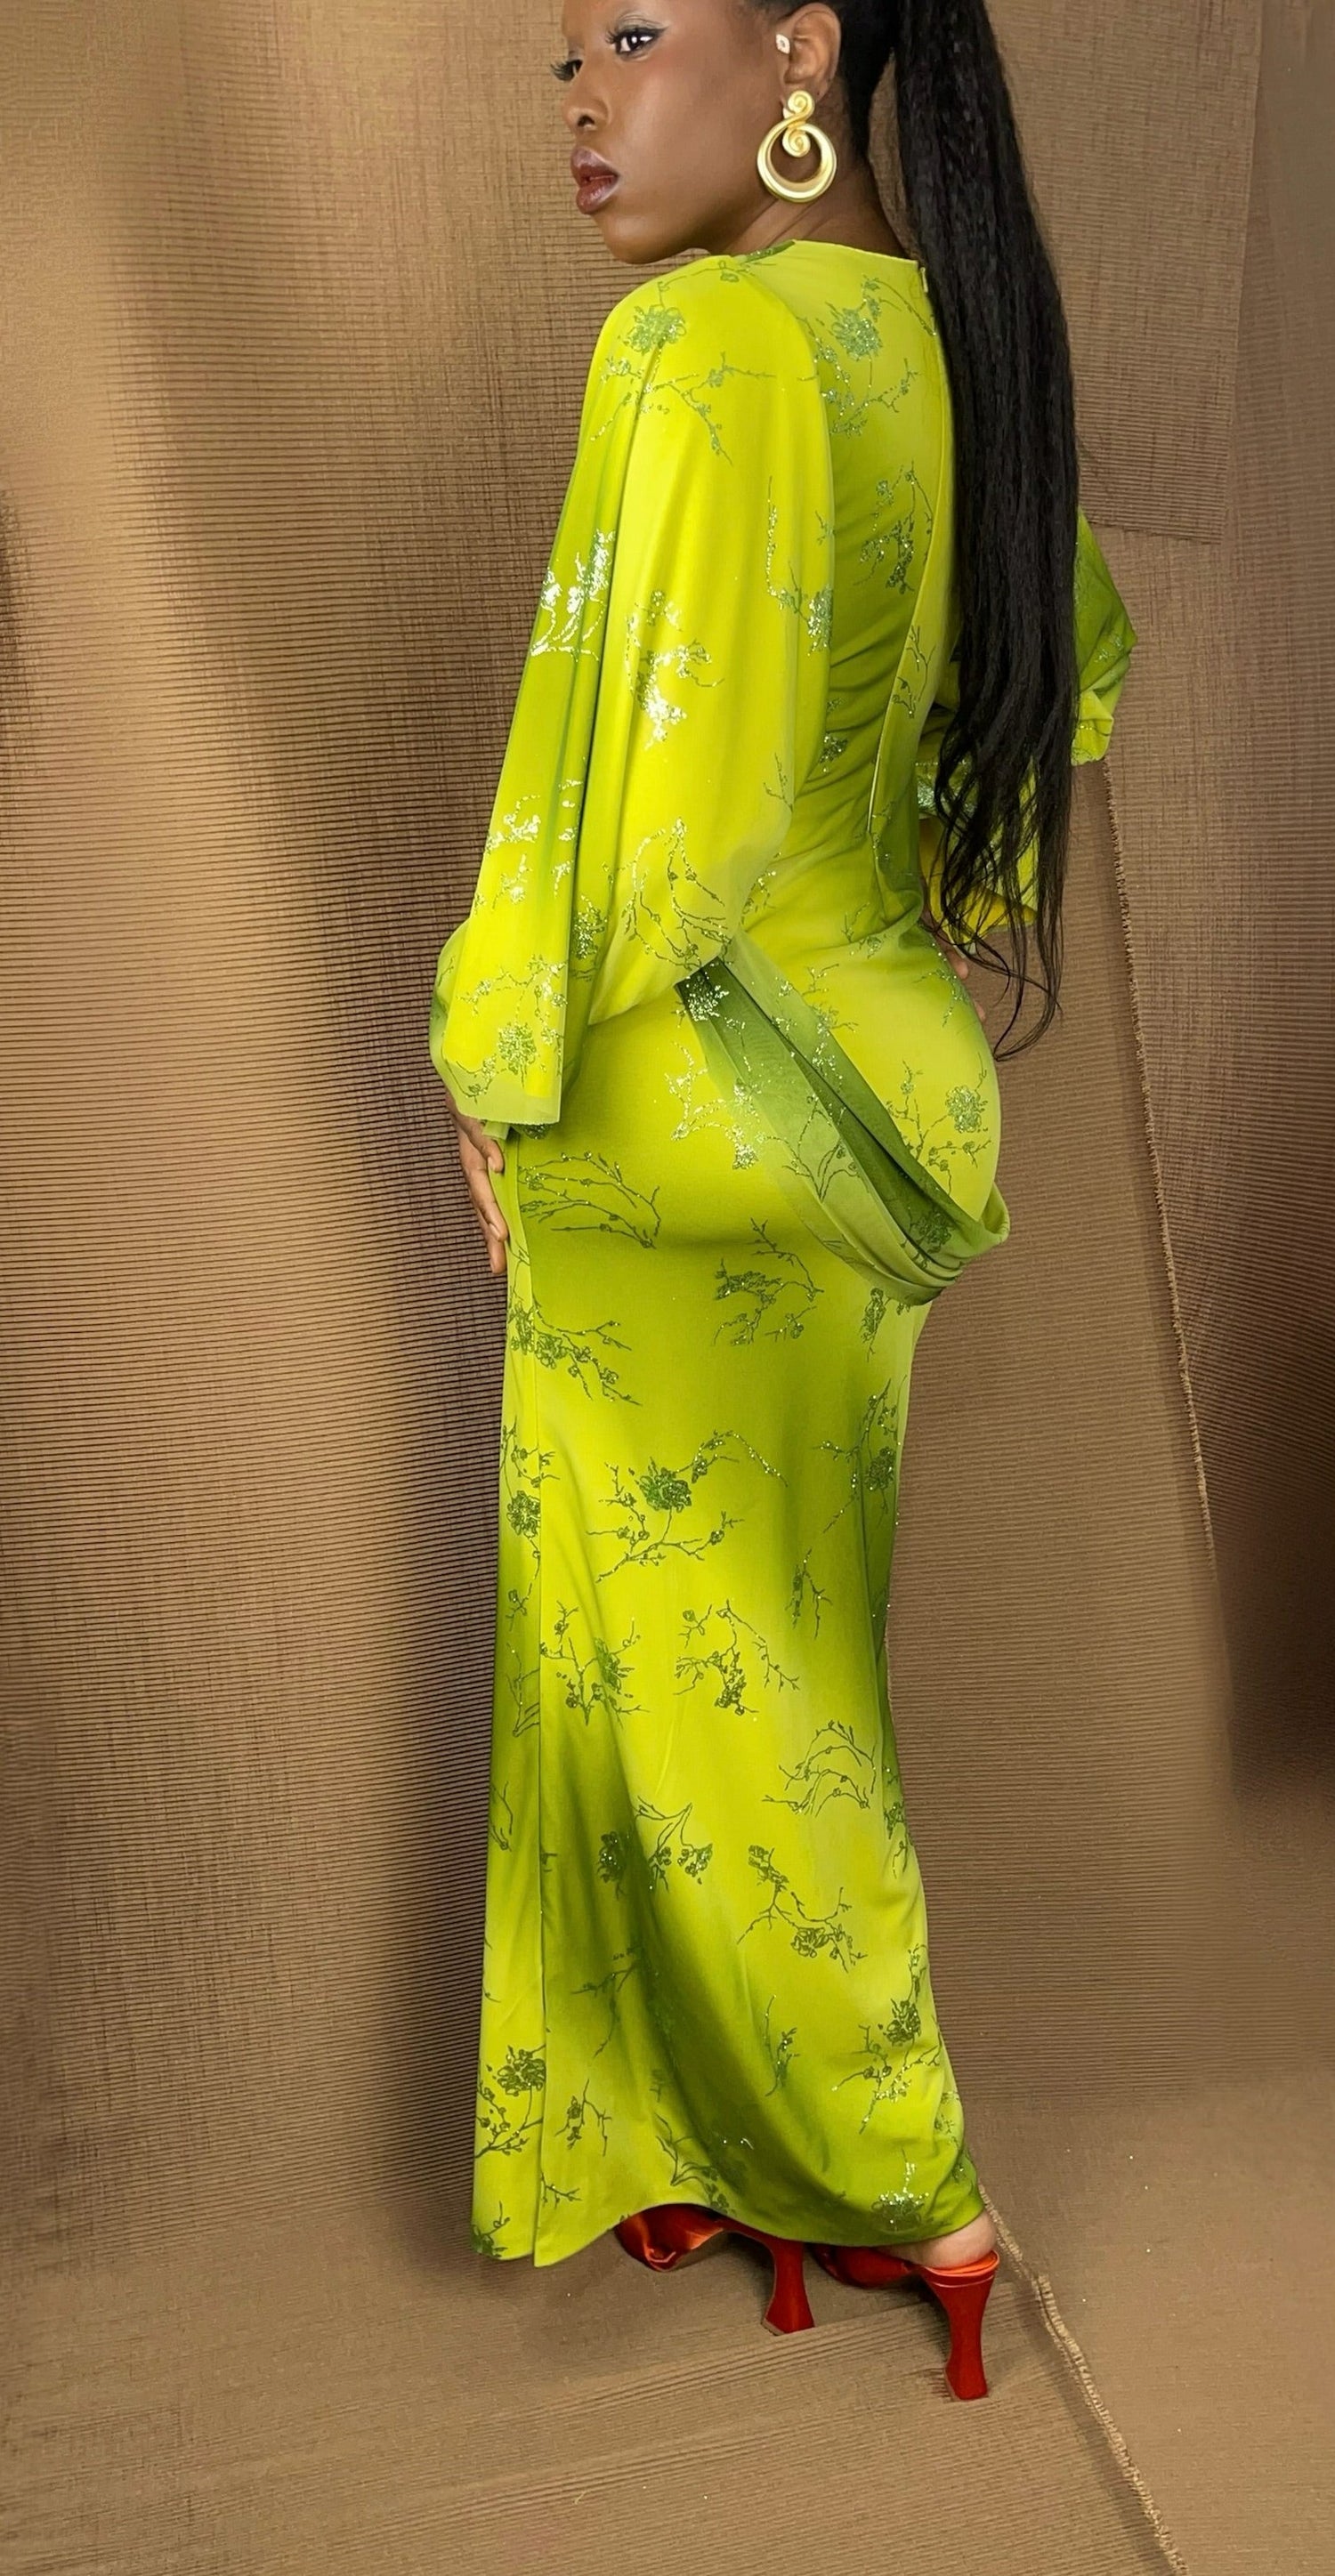 Back view of our ombre green and yellow modest dress. Dress details glitter floral pattern all over, and a drape sash across one shoulder. The sleeves feature a asymmetrical style while staying light and flowy.  